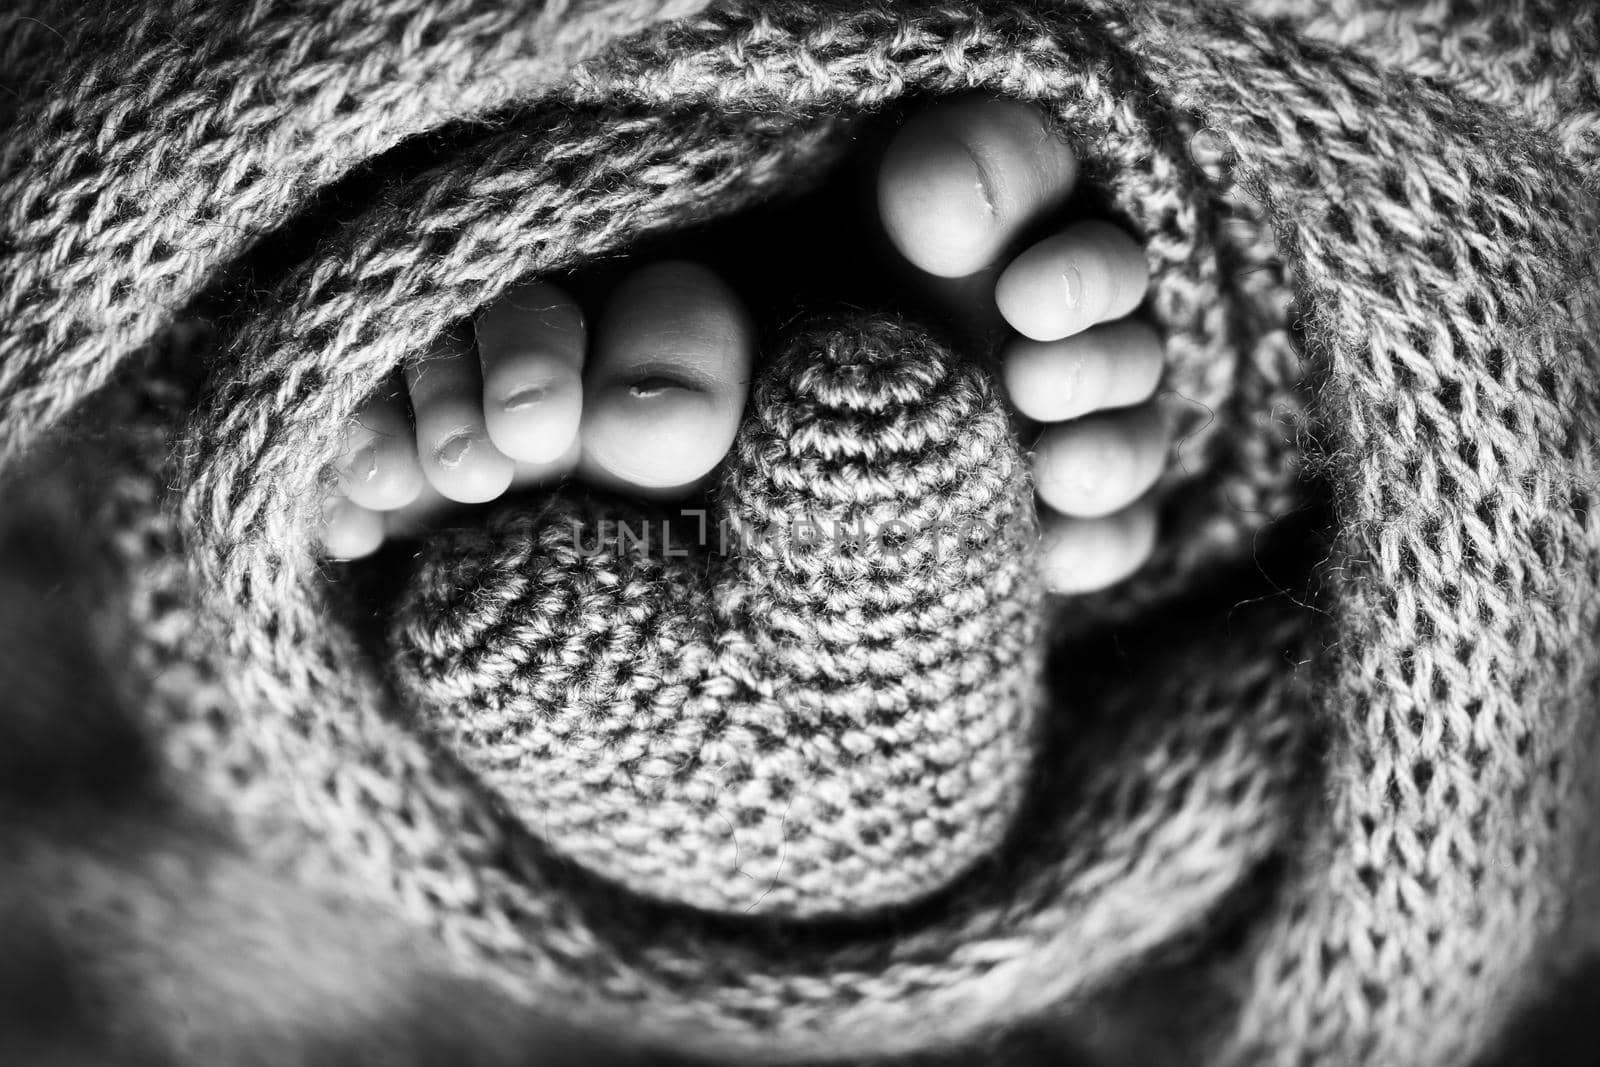 Feet of a newborn with a wooden heart, wrapped in a soft blanket. Black and white studio photography. High quality photo